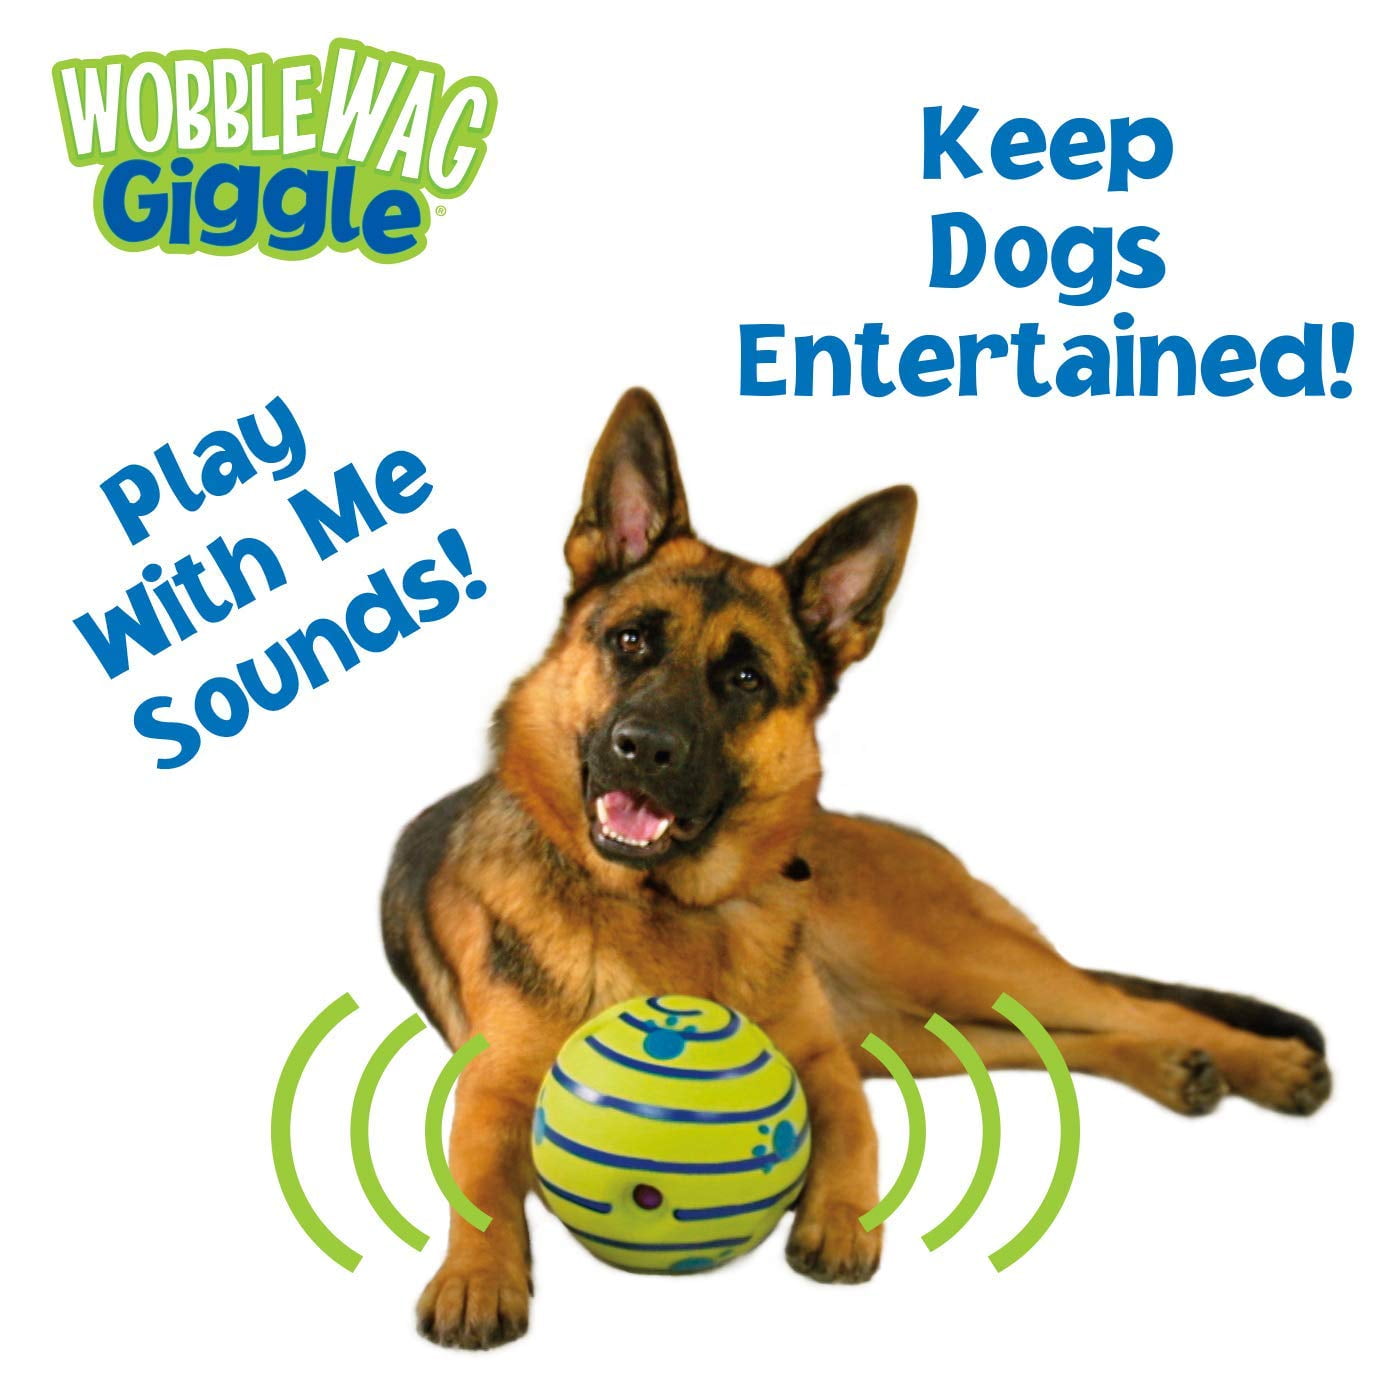 wobble wag giggle toy